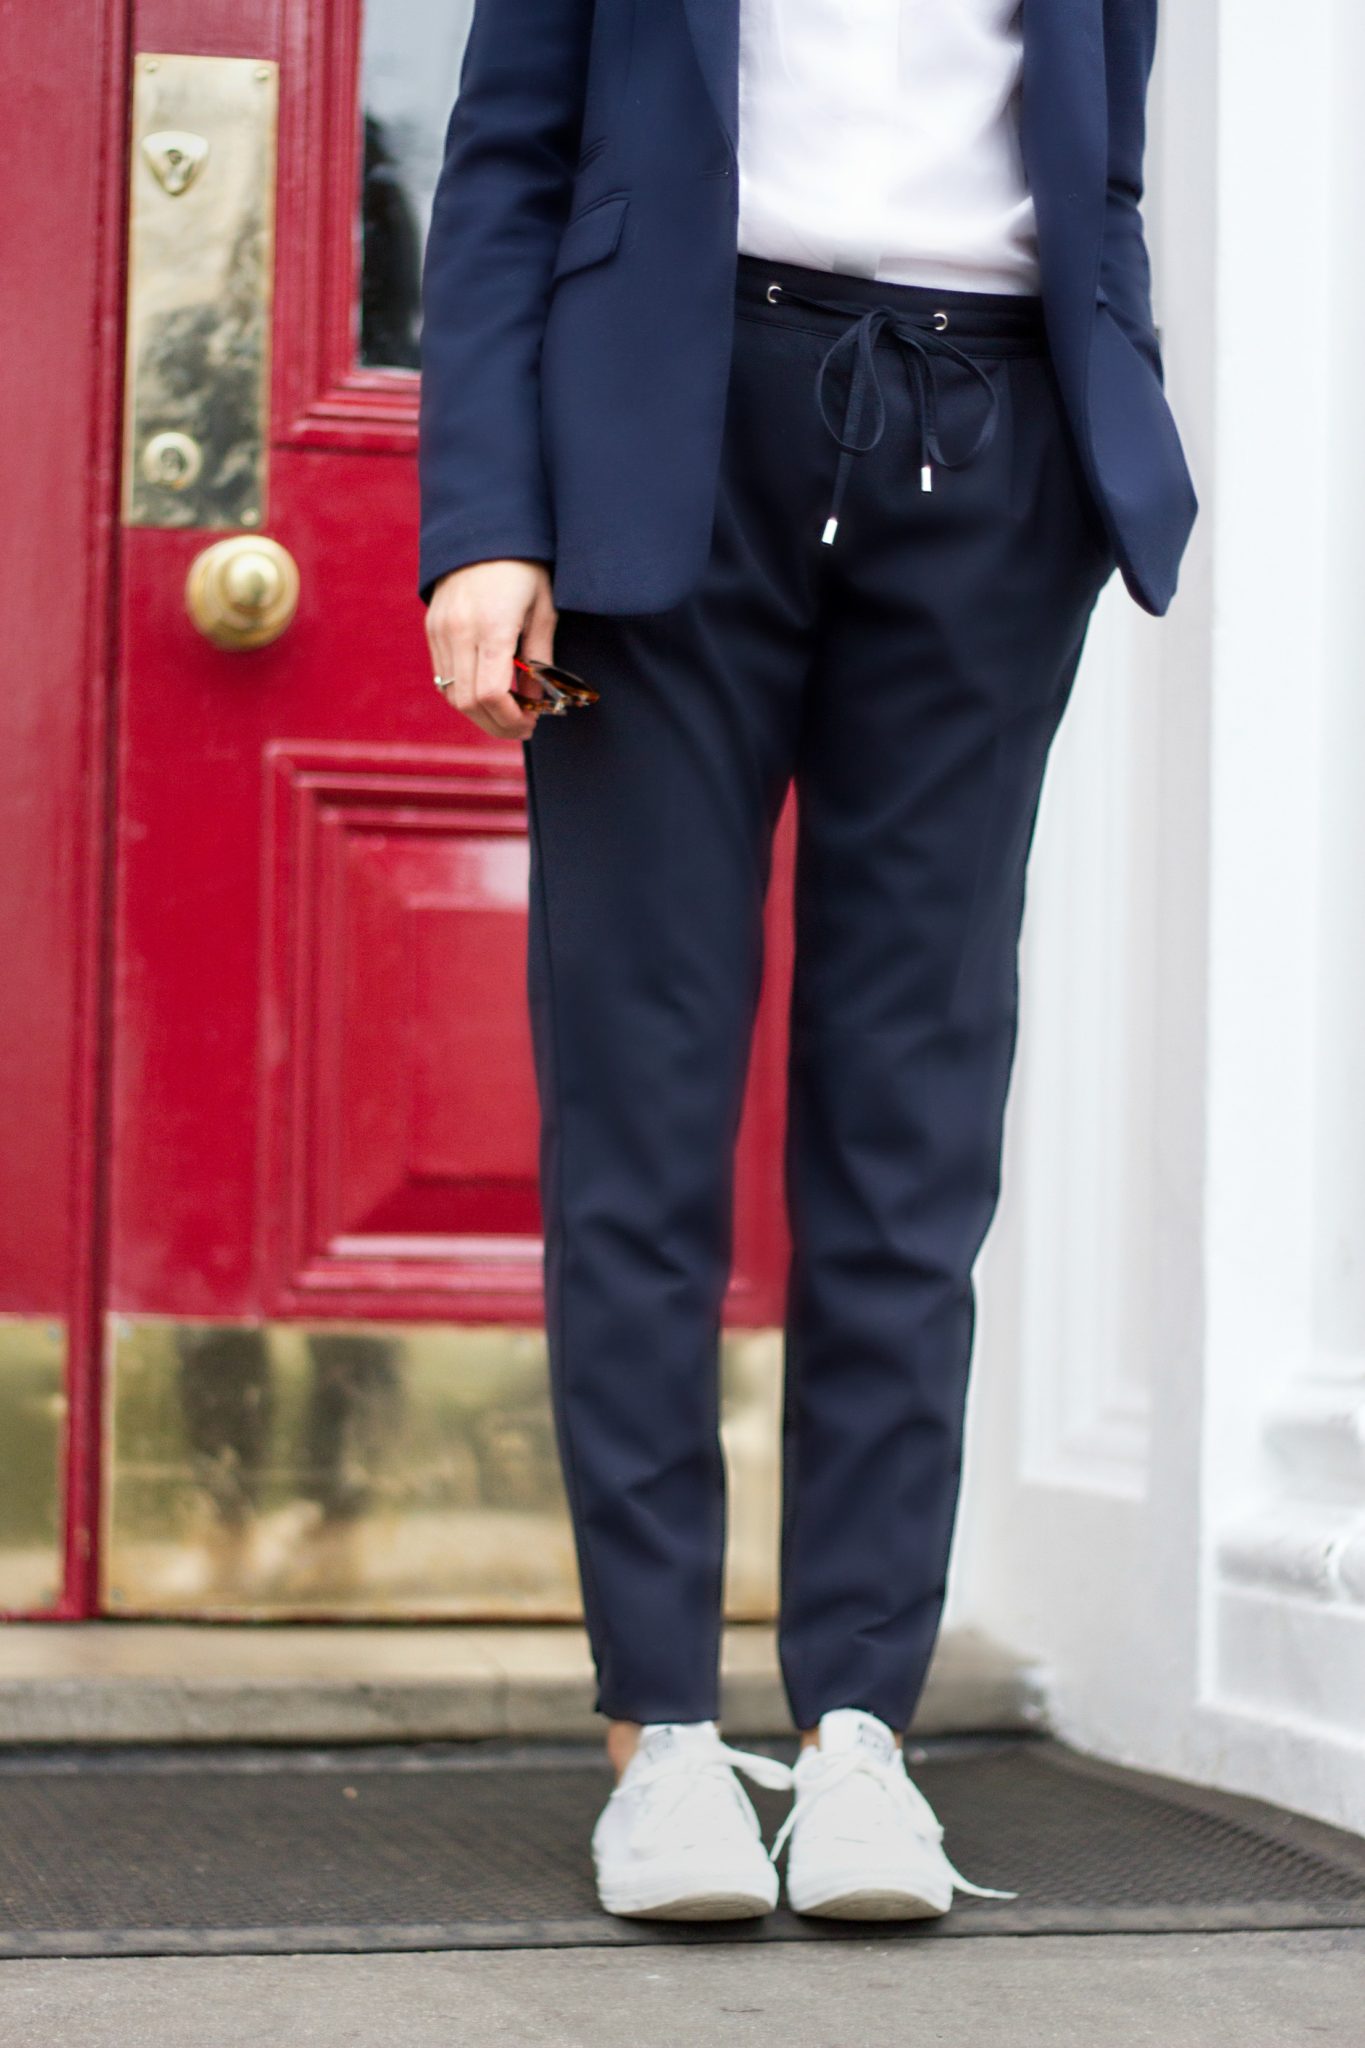 Corporate_Style_Story_Navy_Drawstring_Trousers_White_Shirt_Navy_Blazer_Just_Legs_Outside_Red_Door_2212_3318